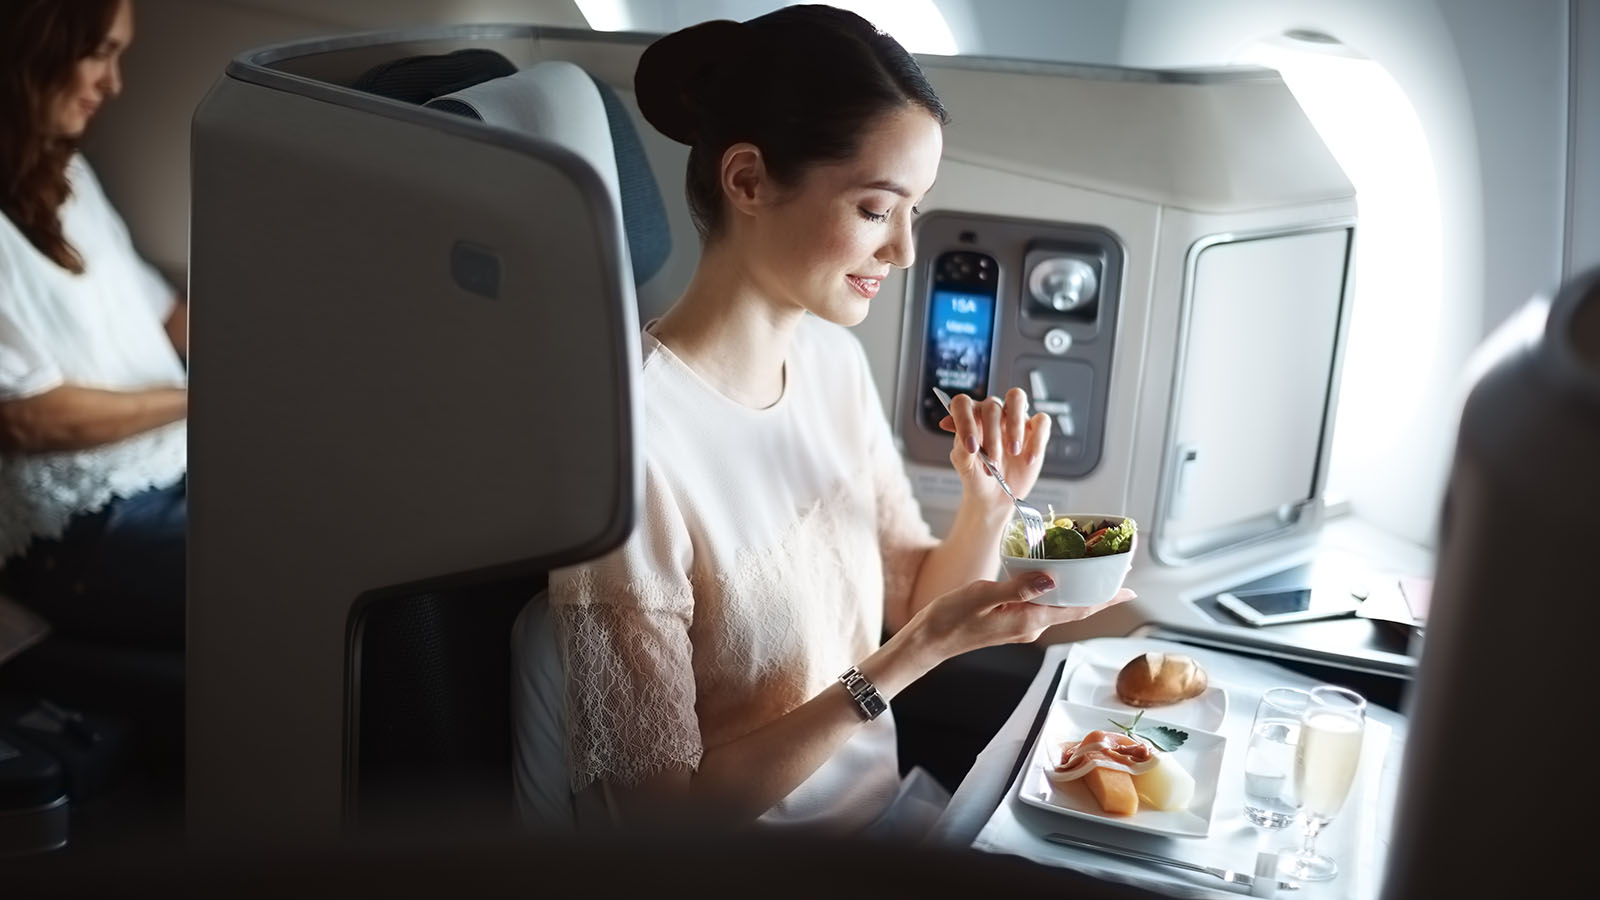 Passenger eating a meal in Cathay Pacific Business Class - bookable if you buy Cathay miles.